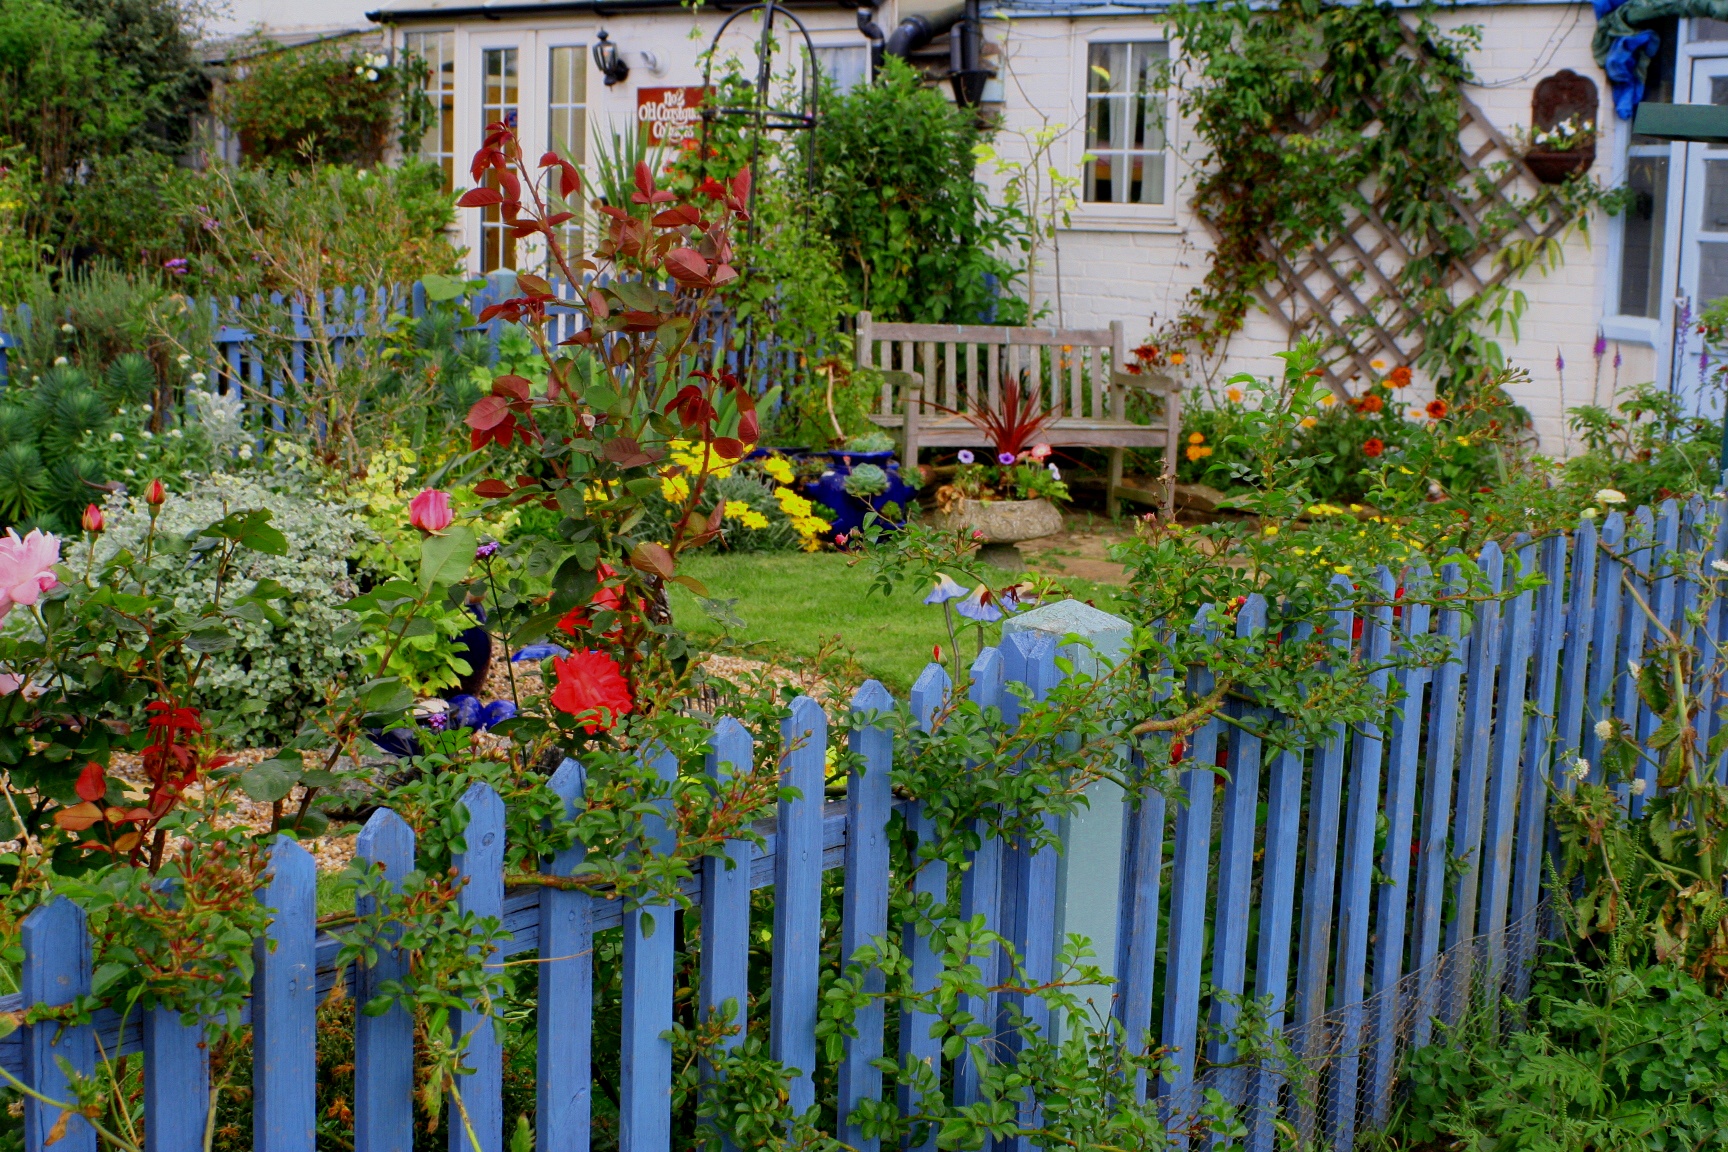 Seaside cottage garden with blue fencing